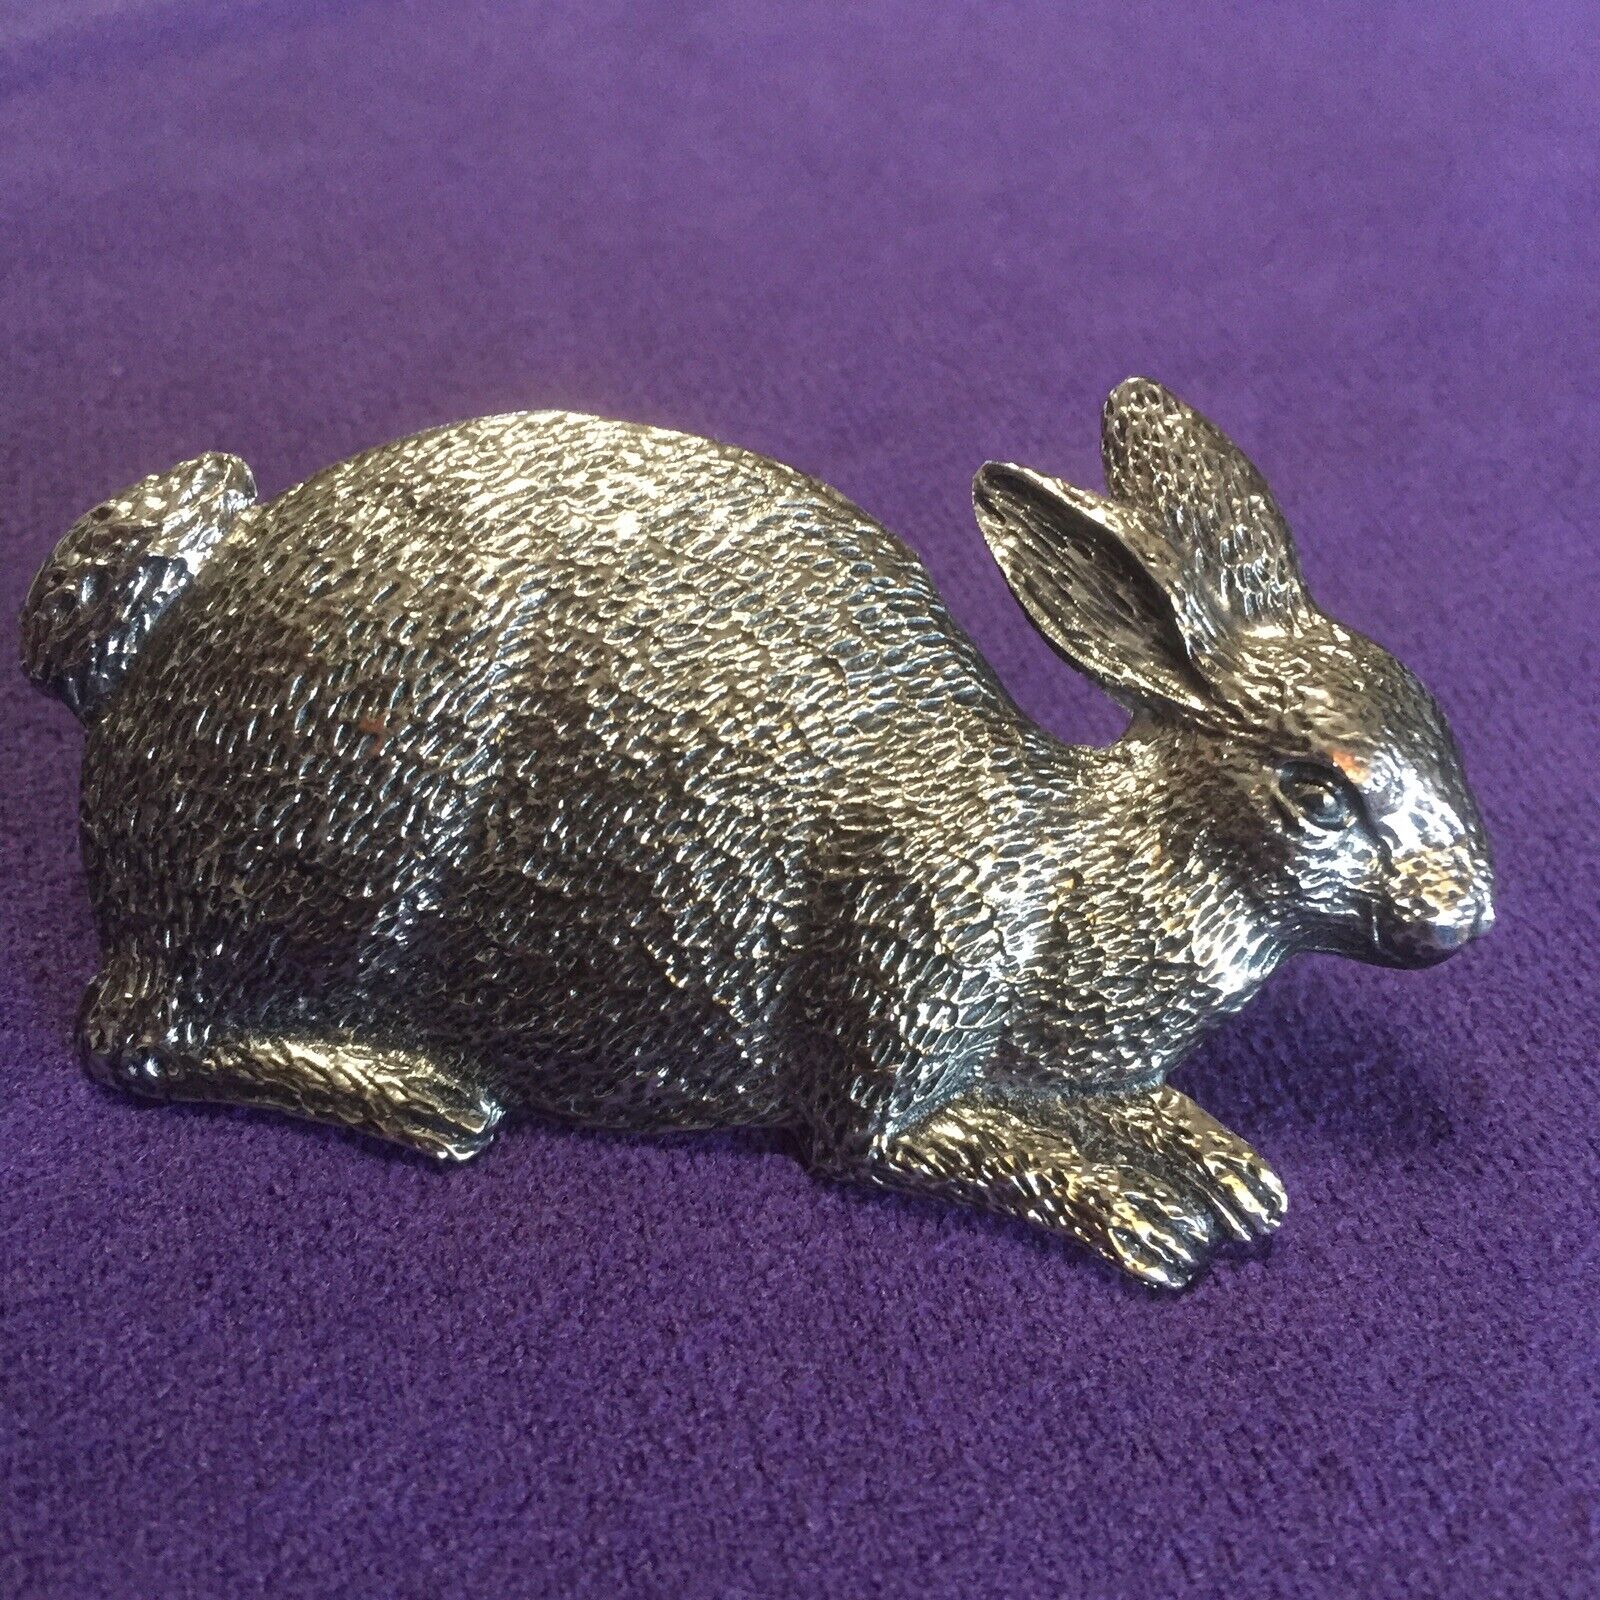 Metal Rabbit Screwable Animal  Figurine With Pin On The Back Project/Craft